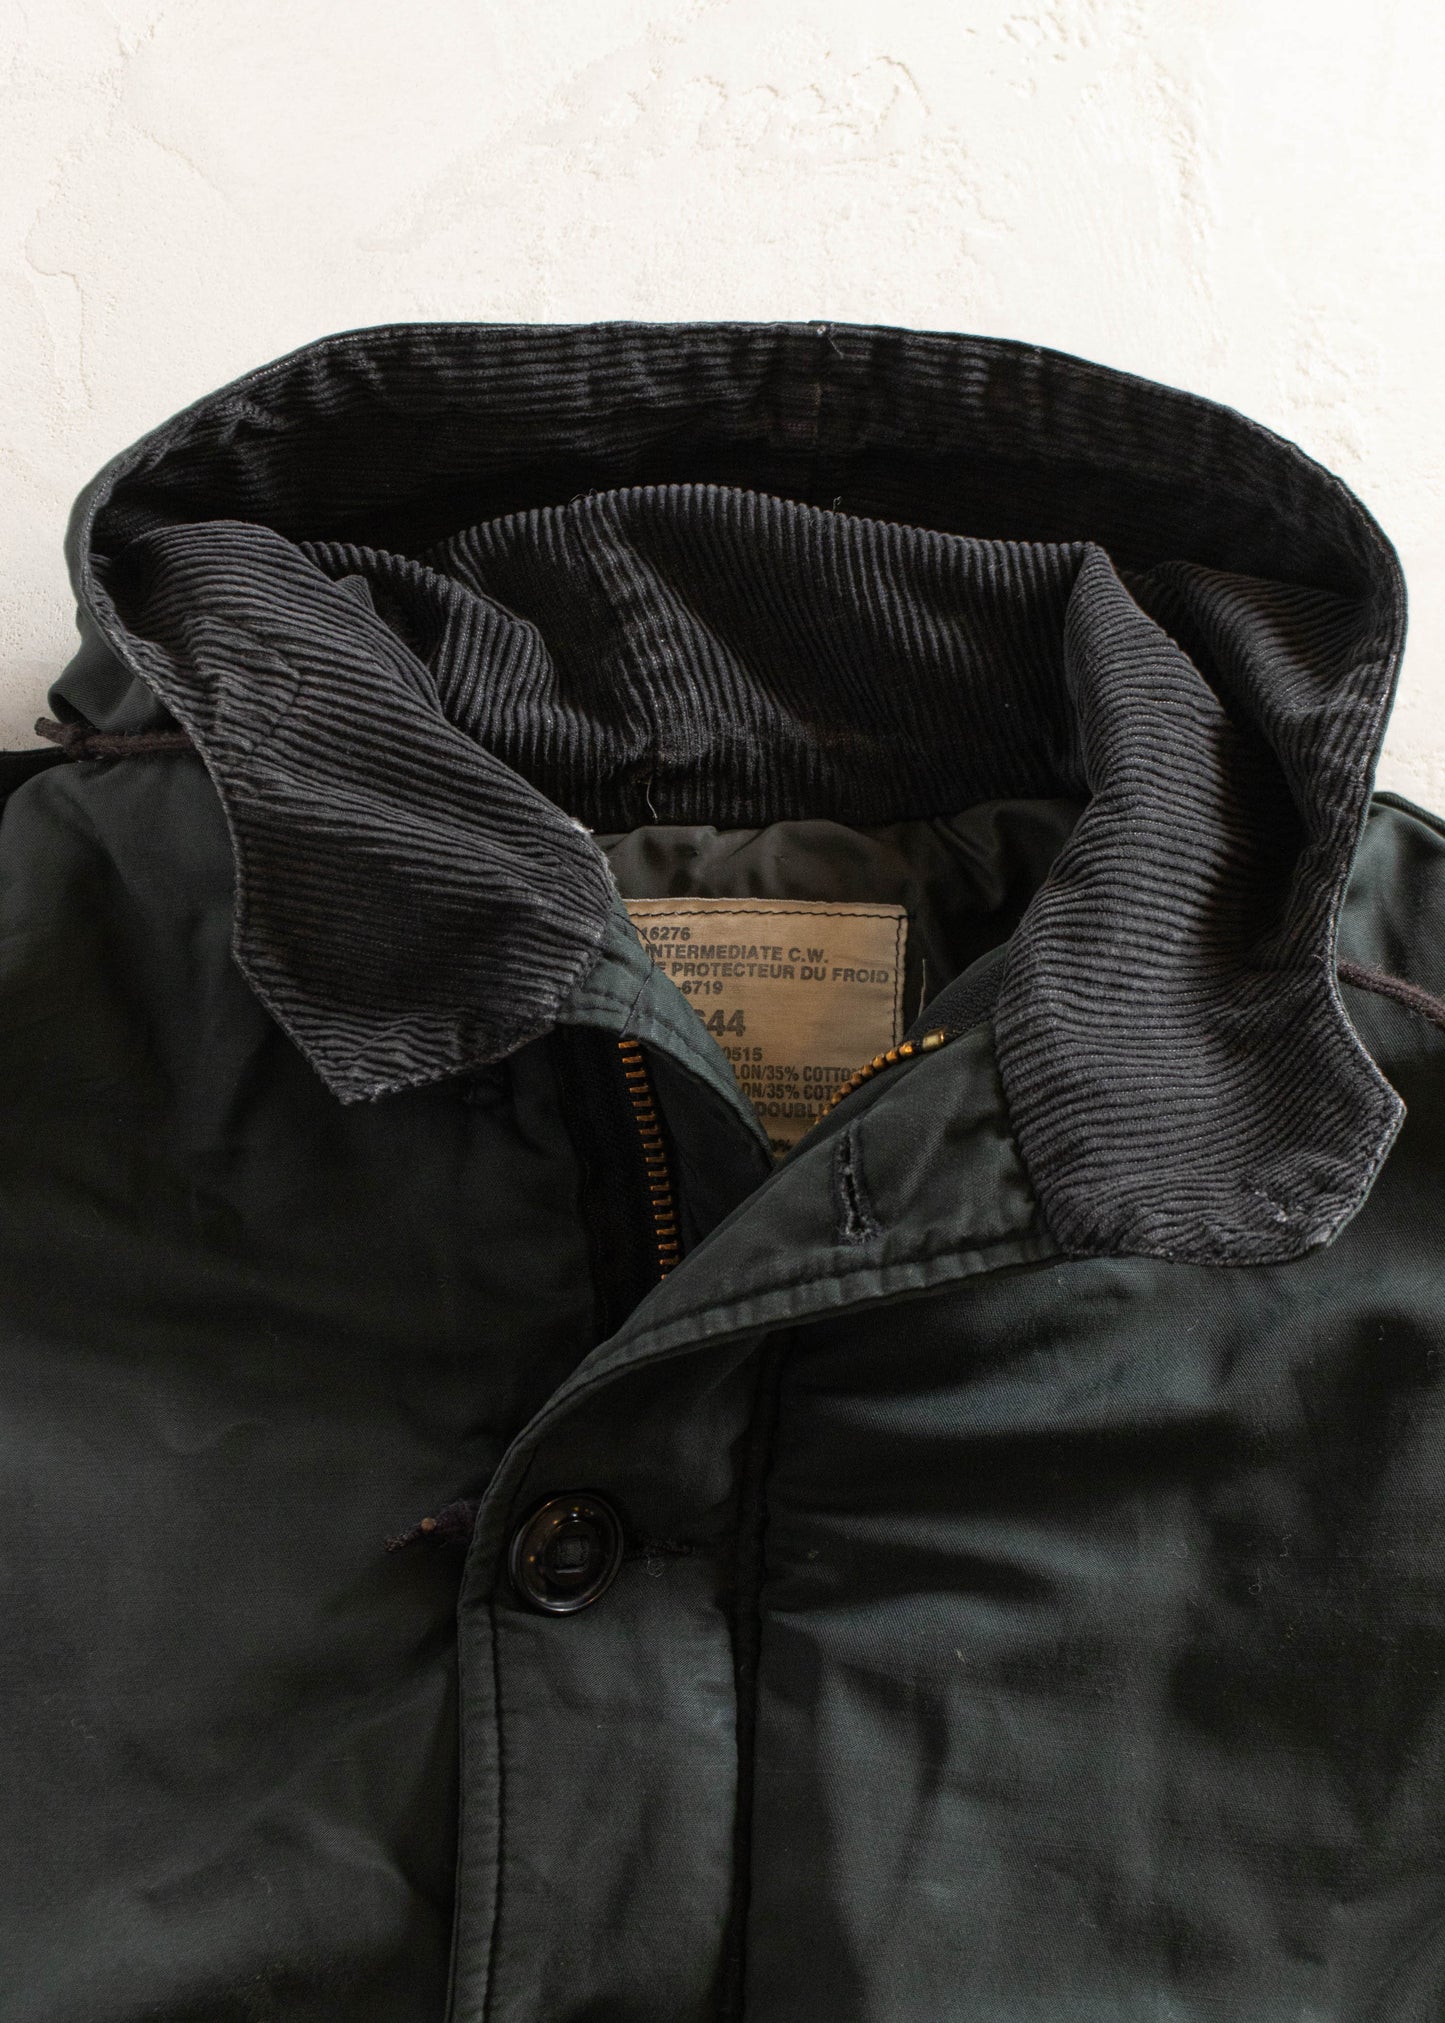 1980s US Navy Hooded Parka Size S/M